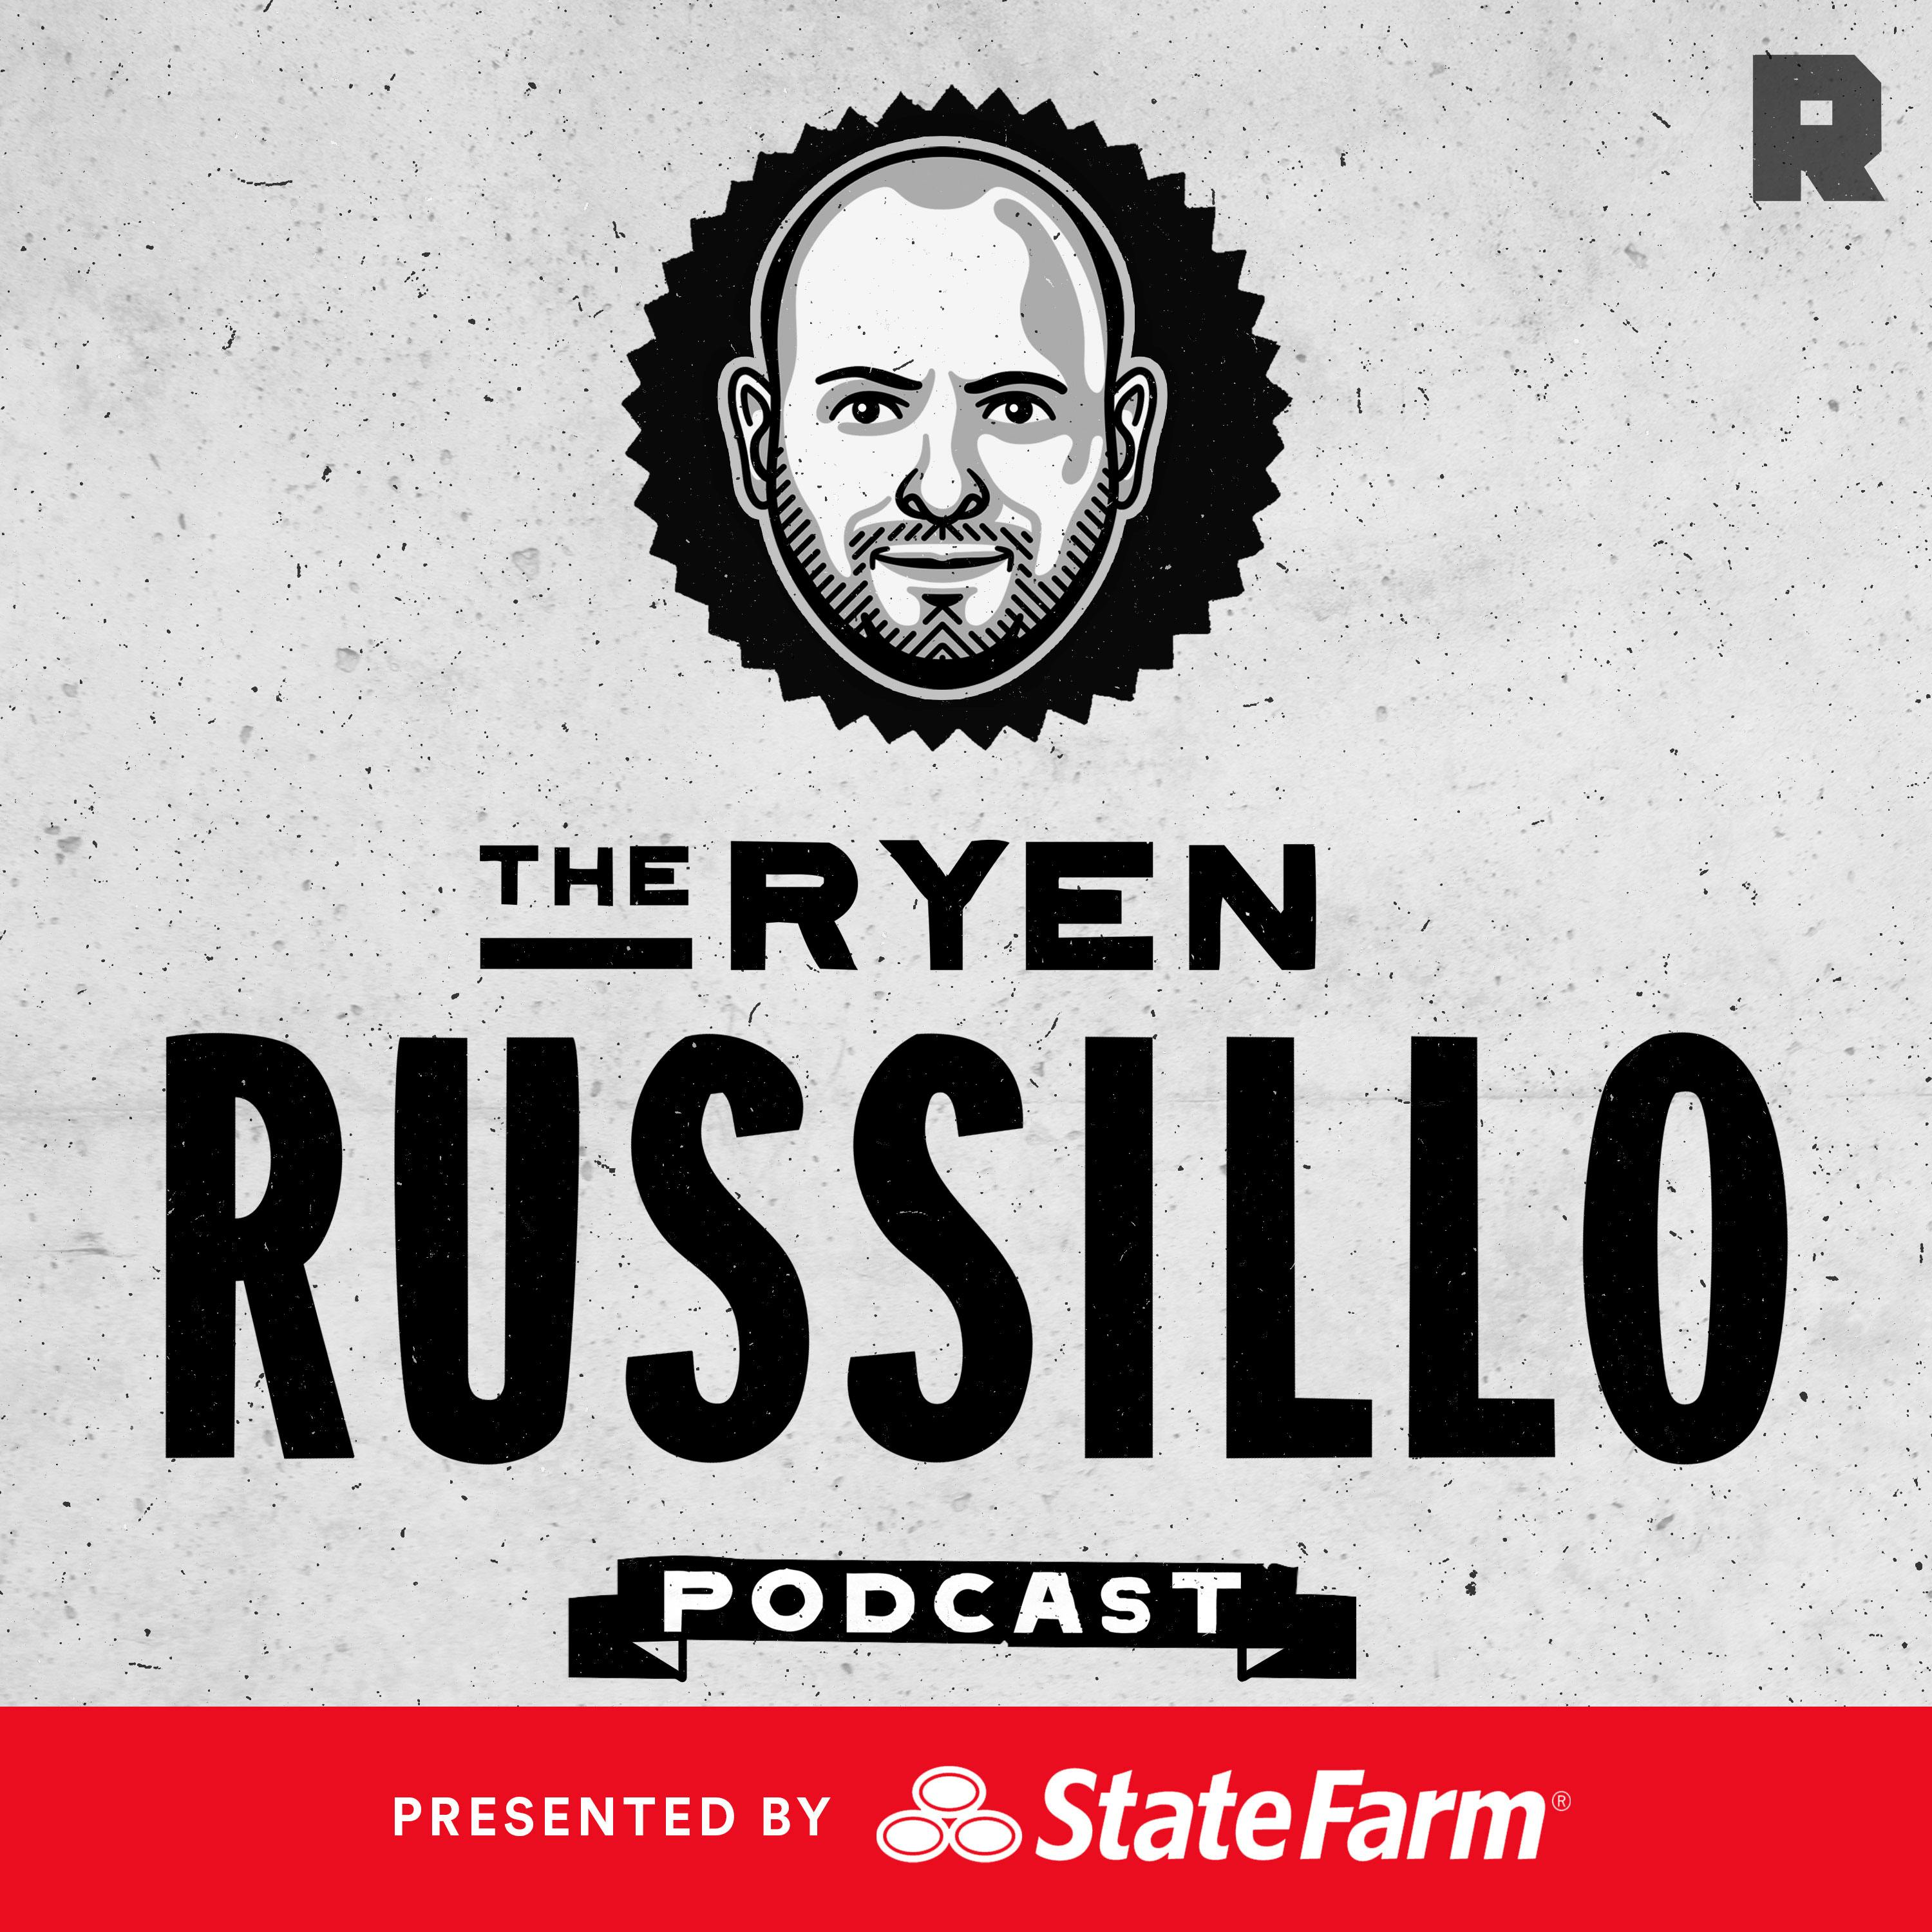 The Ryen Russillo Podcast podcast show image